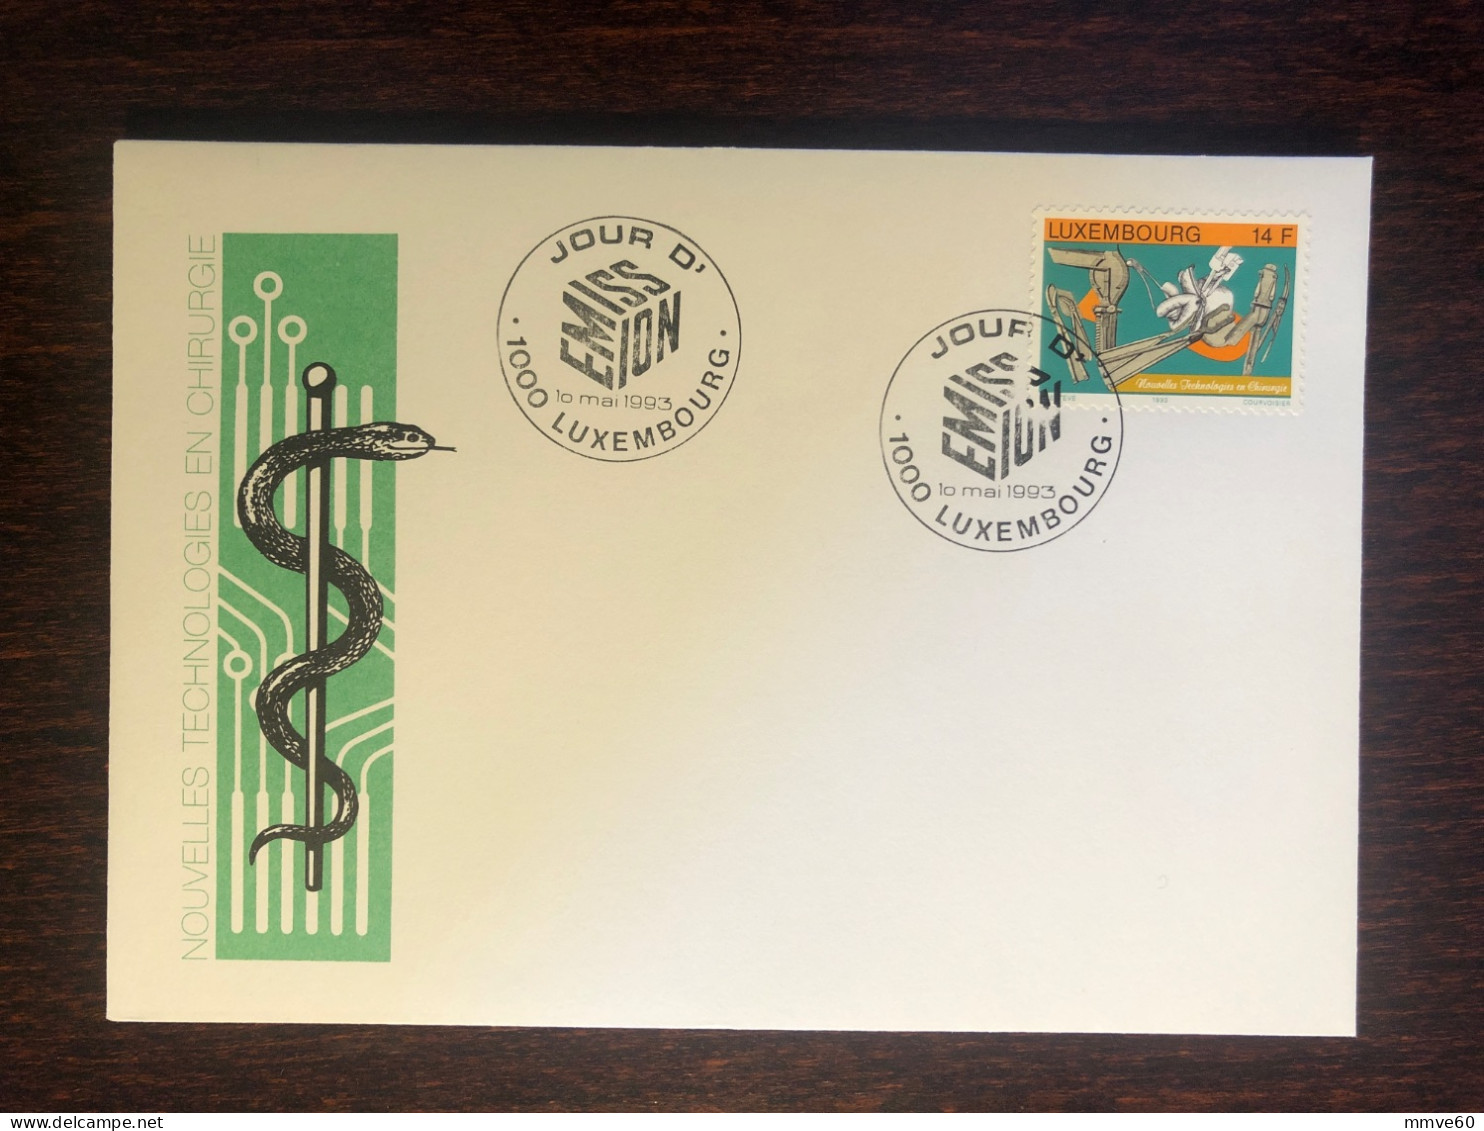 LUXEMBOURG FDC COVER 1993 YEAR SURGERY HEALTH MEDICINE STAMPS - FDC